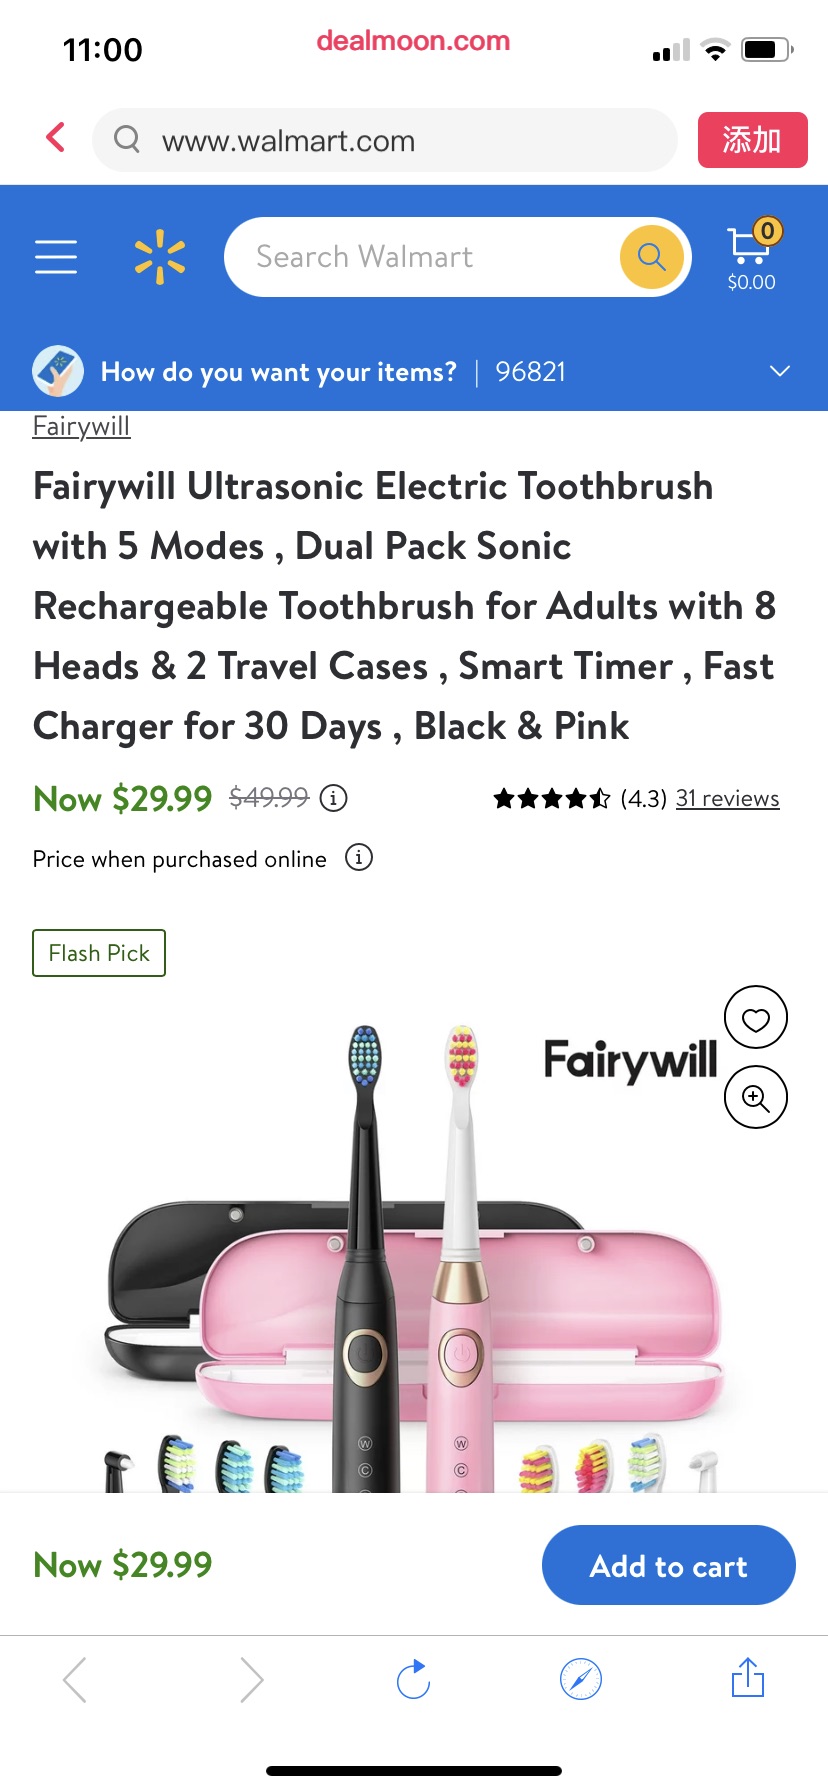 Fairywill Ultrasonic Electric Toothbrush with 5 Modes , Dual Pack Sonic Rechargeable Toothbrush for Adults with 8 Heads & 2 Travel Cases , Smart Timer , Fast Charger for 30 超声波电动牙刷套装